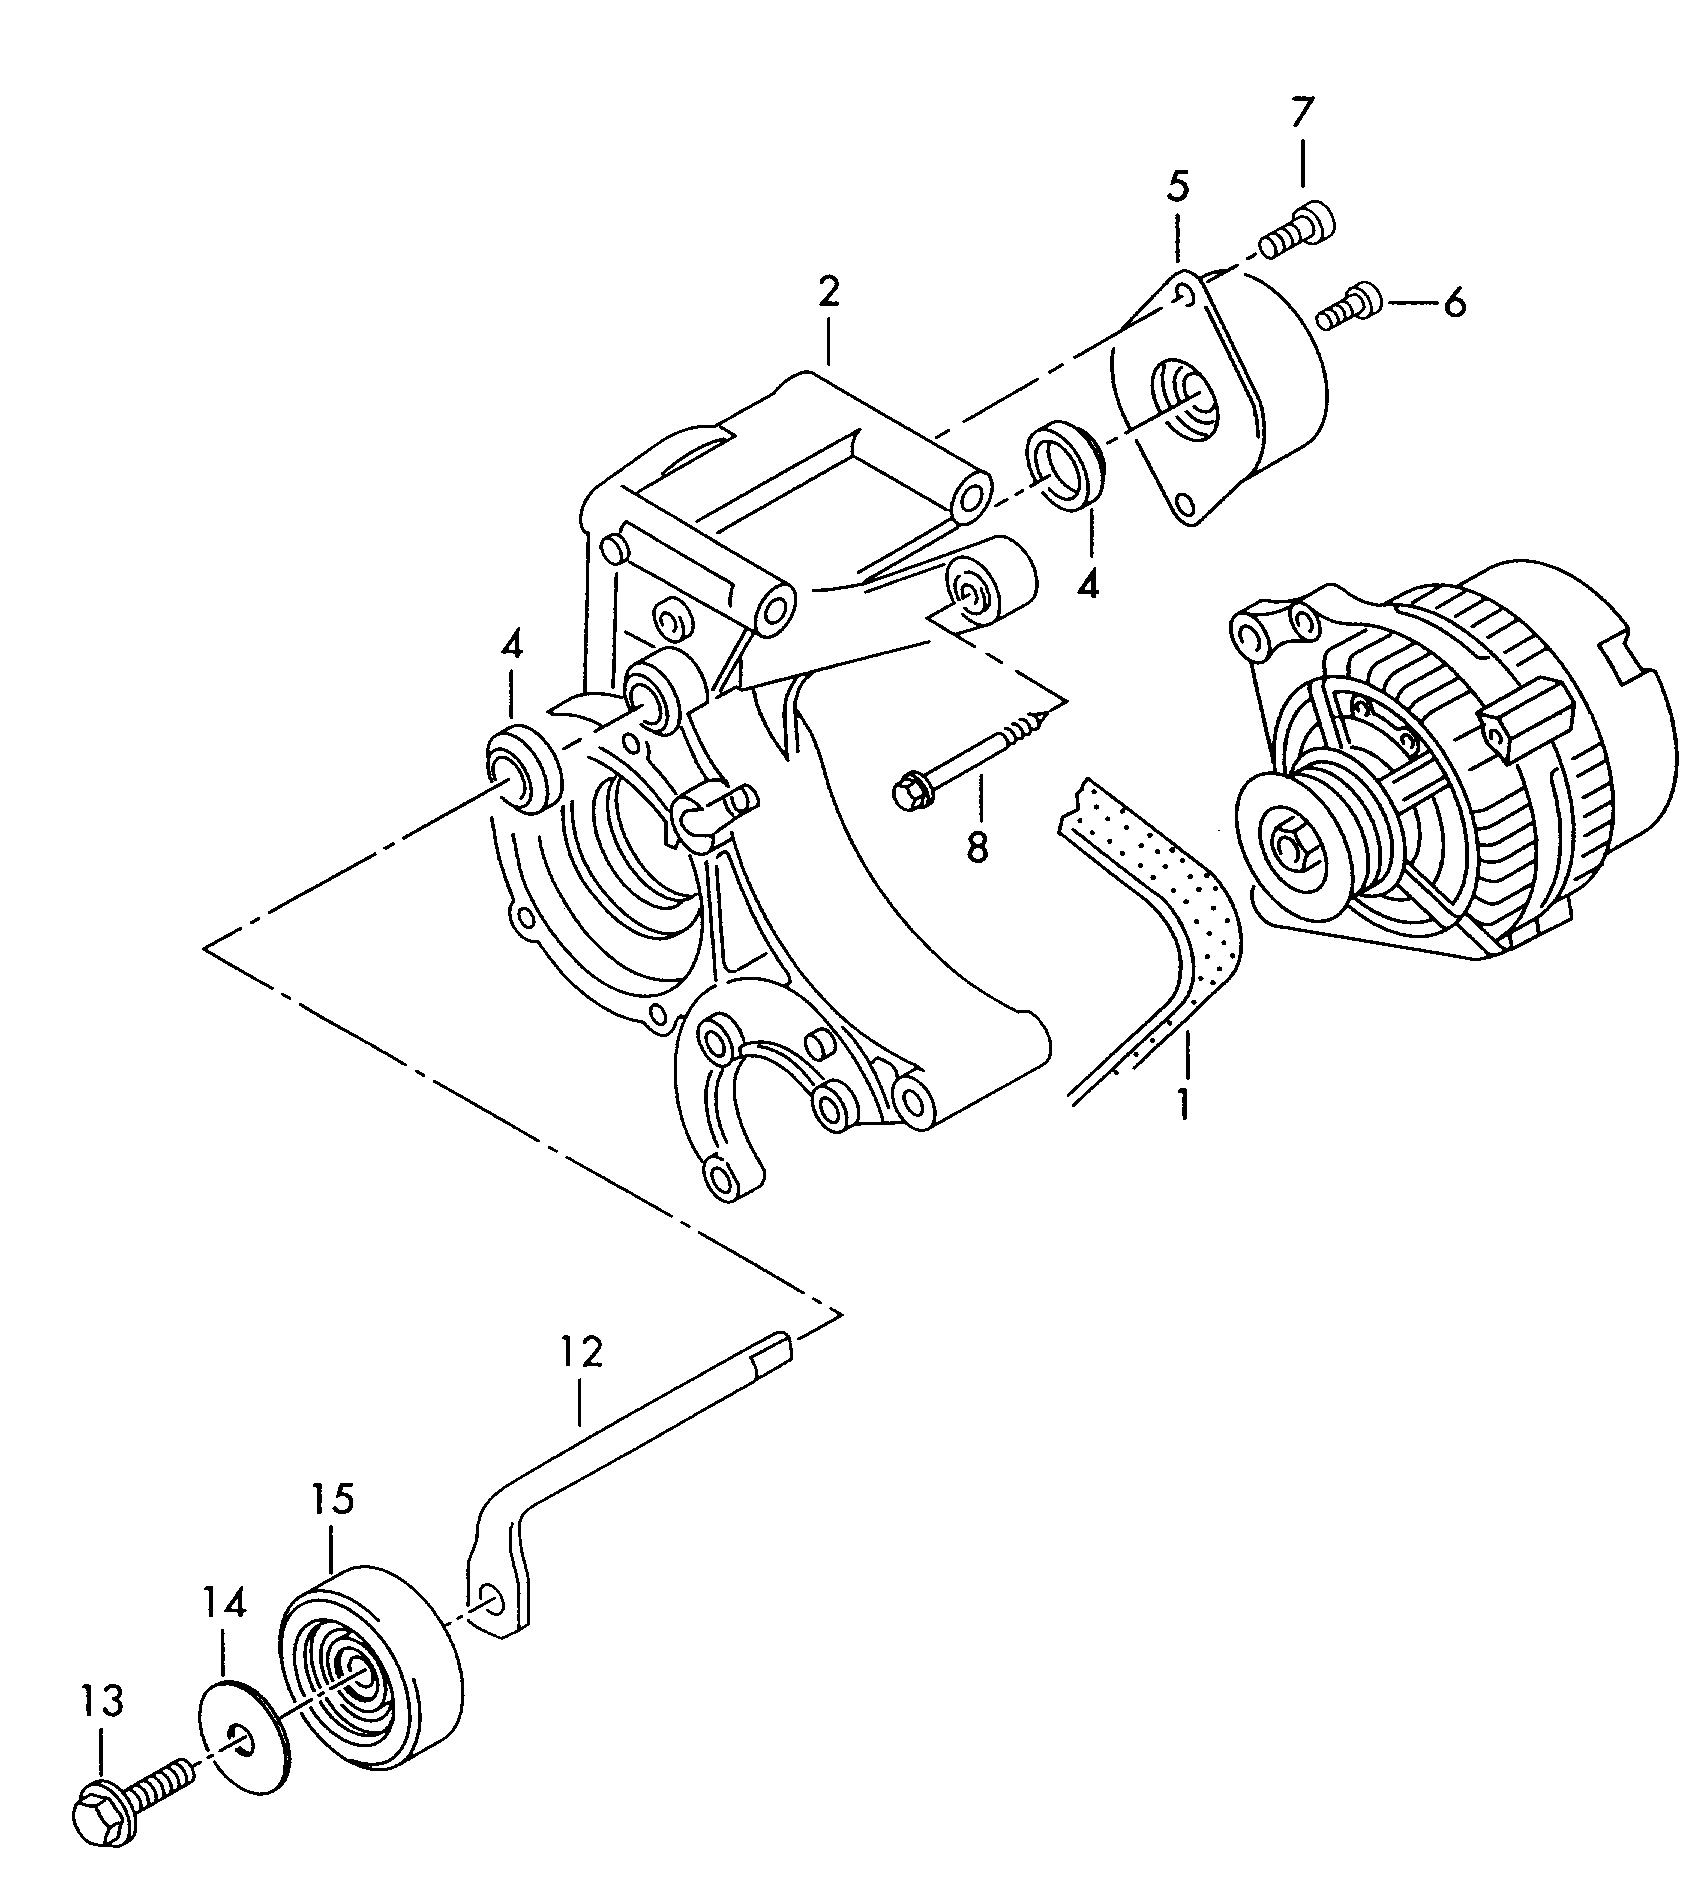 connecting and mounting parts<br>for alternatorPoly-V-belt 1.7 Ltr. - Lupo / Lupo 3L TDI - lu